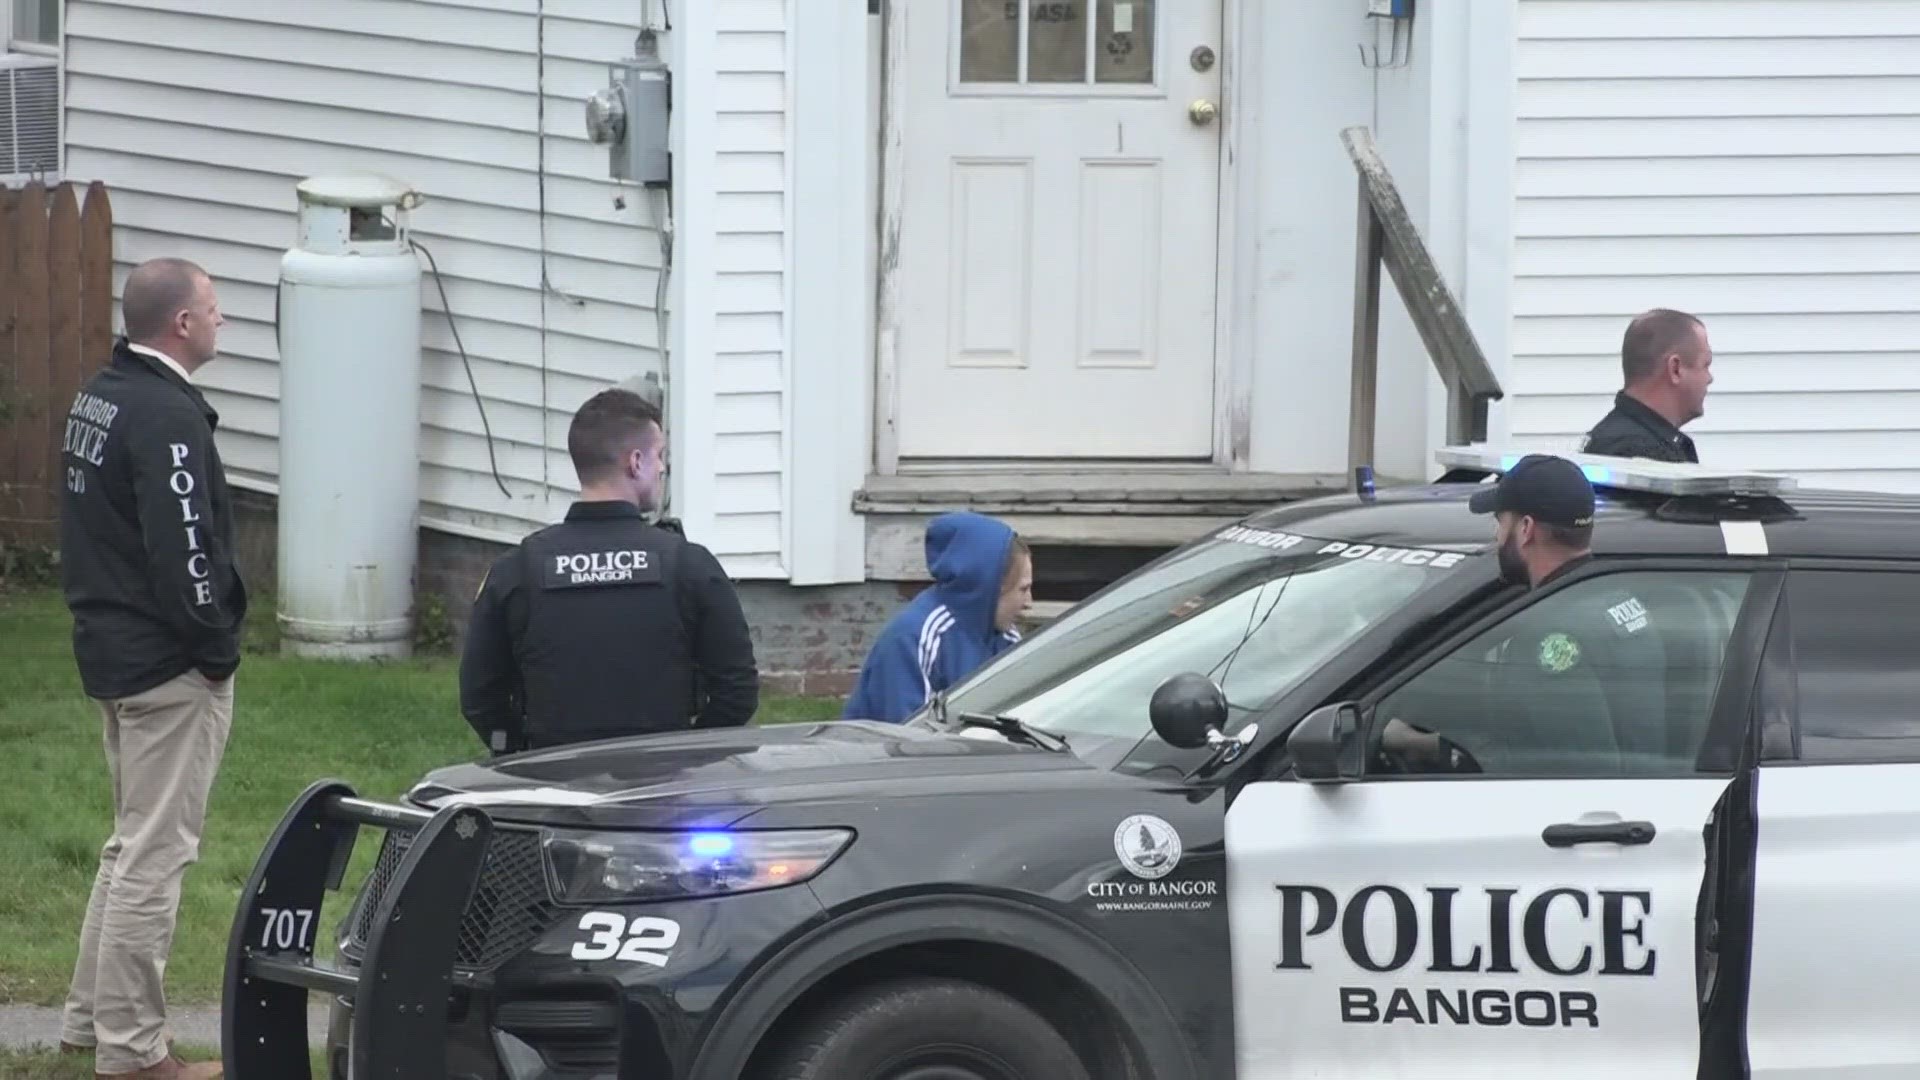 When Bangor police arrived at the scene, they took about 10 people out of the house and arrested five of them on outstanding warrants, Sgt. Jason McAmbley said.